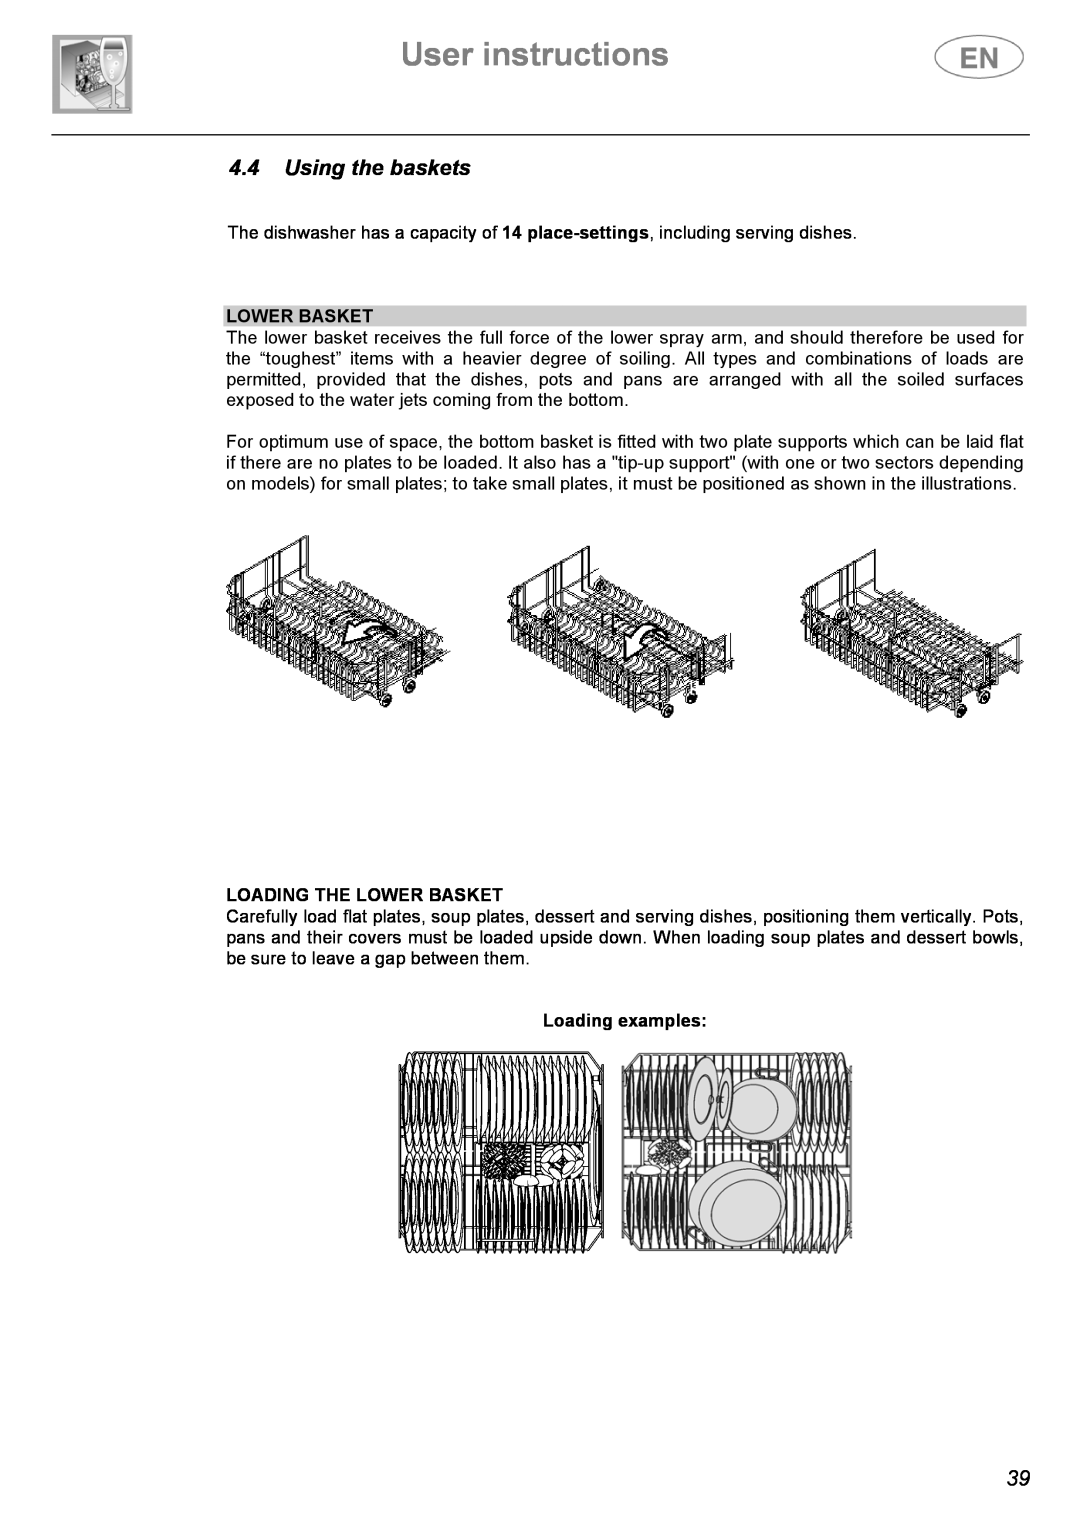 Smeg ST144 instruction manual Using the baskets, Loading The Lower Basket, Loading examples, User instructions 